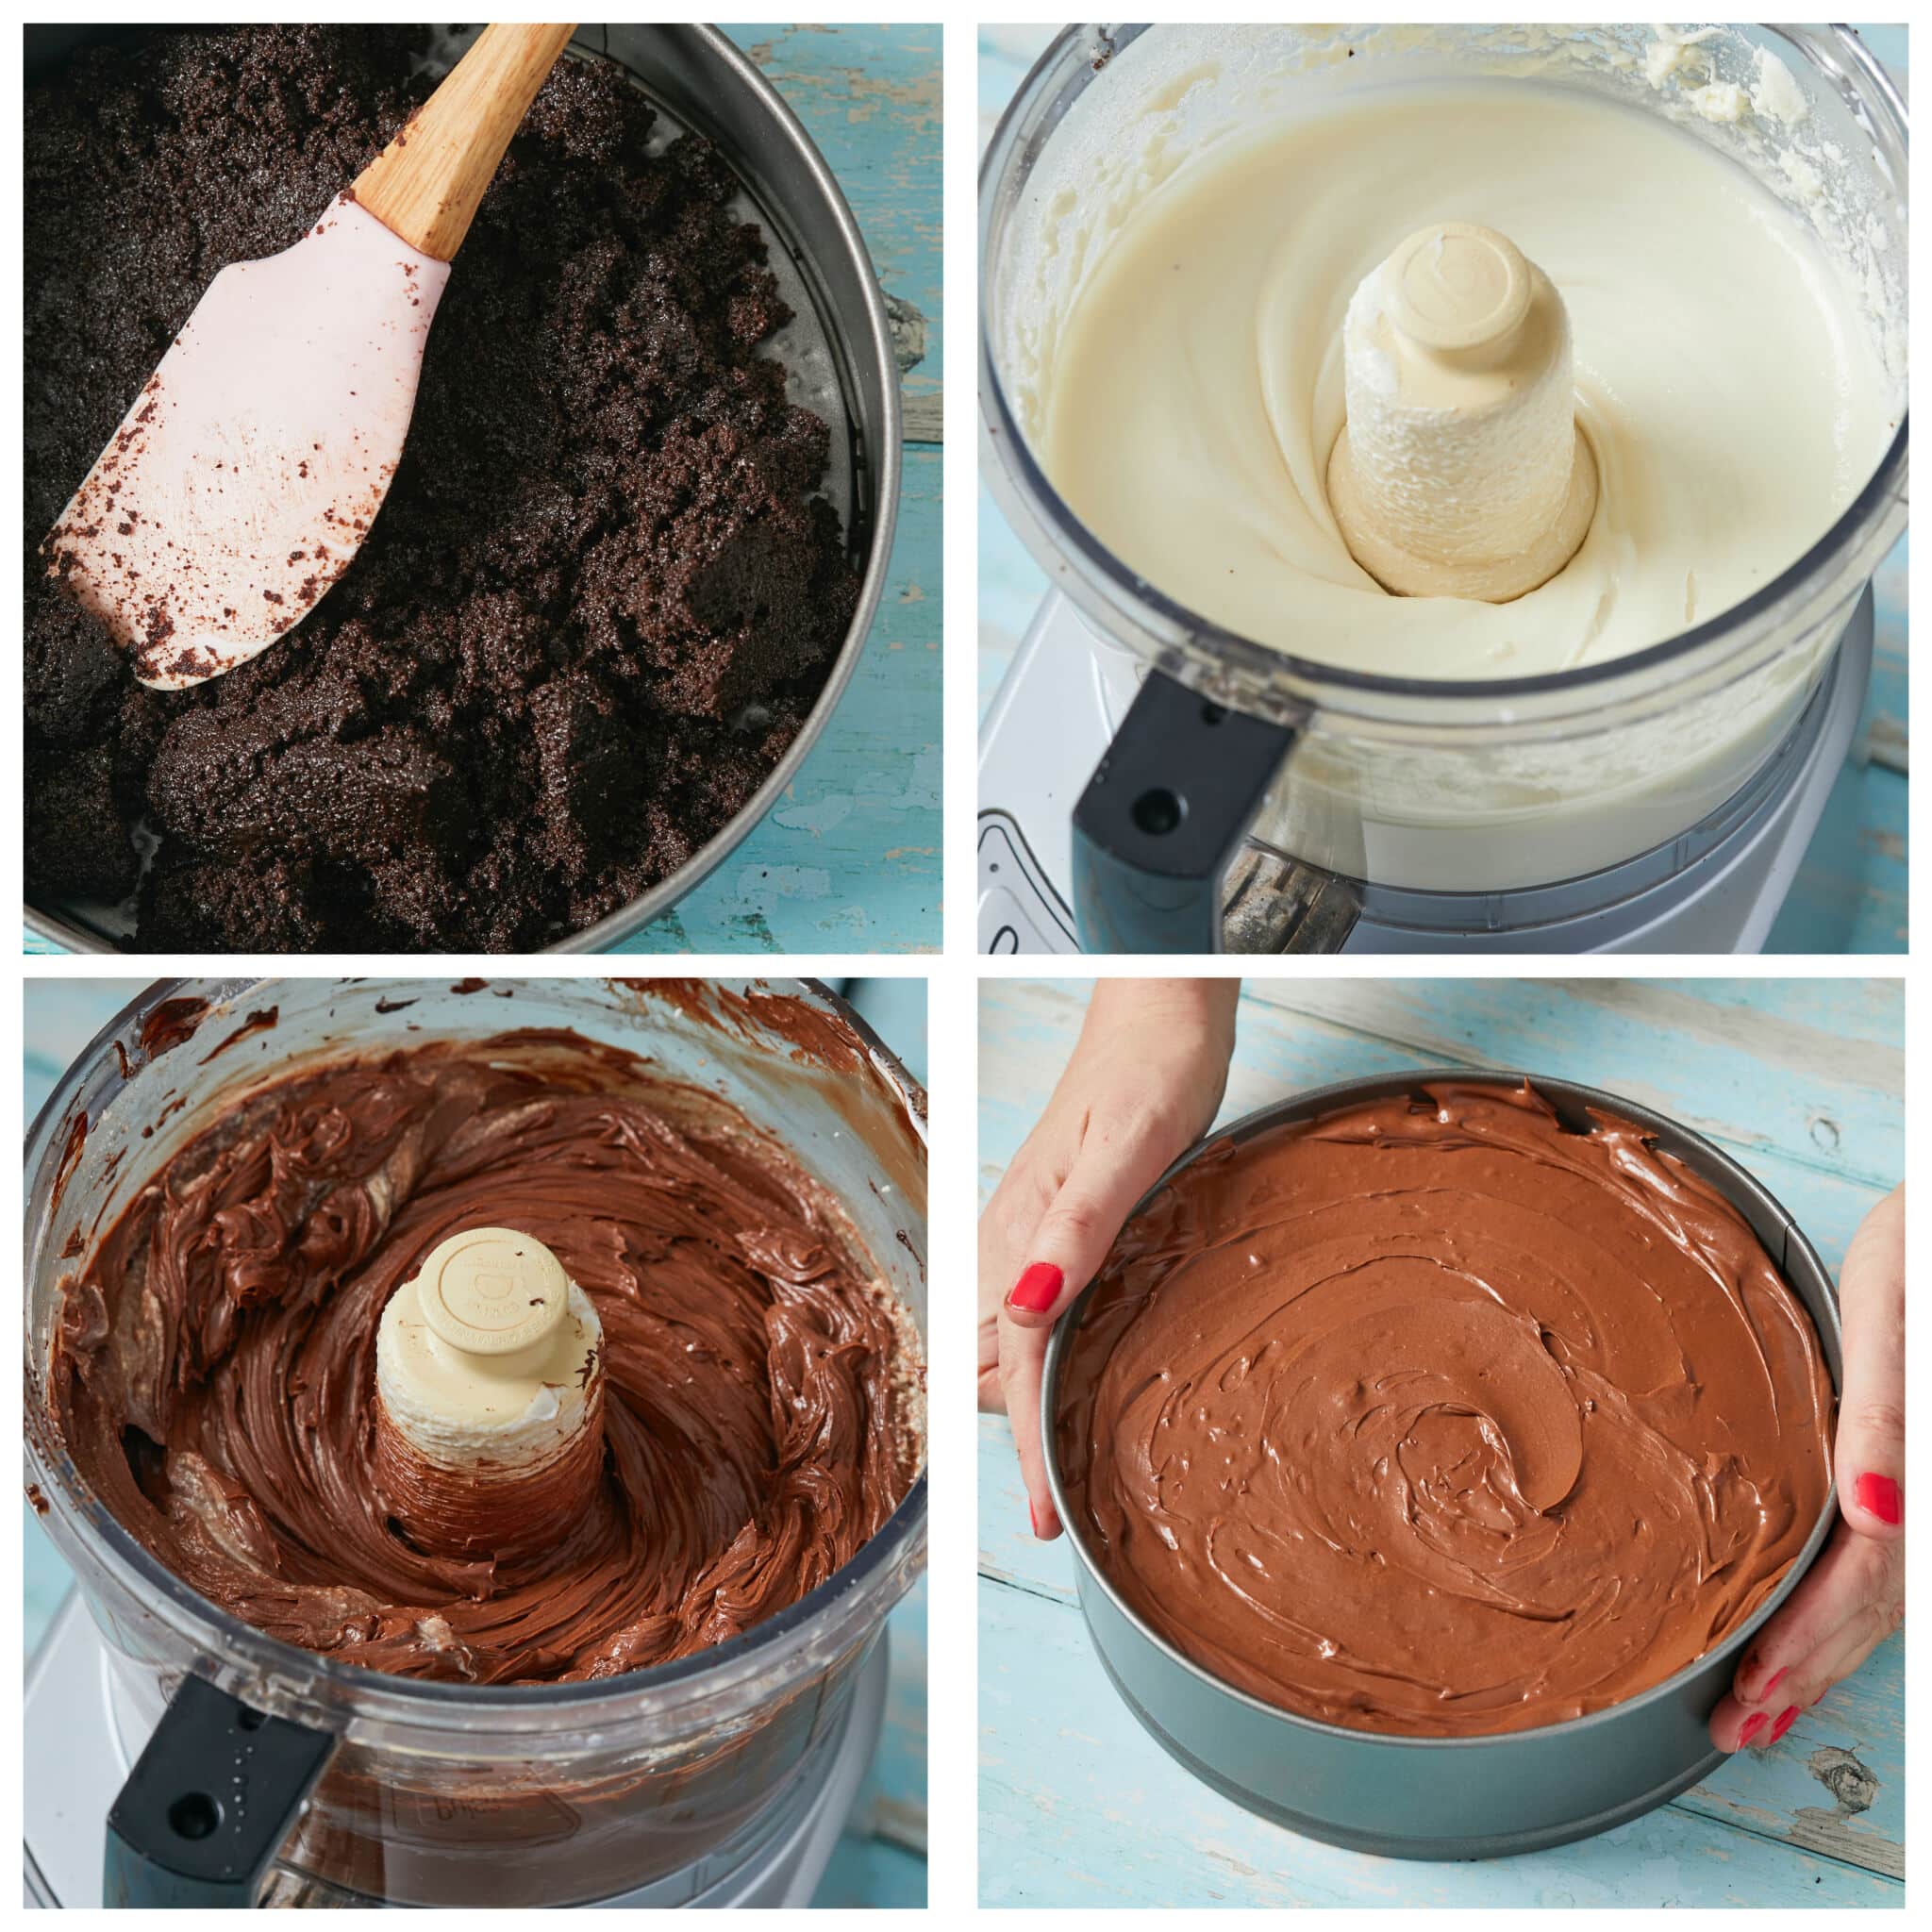 Step-by-step instruction on making a No-Bake Chocolate Cheesecake. Press melted butter with cookie crumb mixture into the spring form pan as the crust. Pulse the cream cheese and sugar in the food processor, followed by the melted chocolate and cocoa powder then whipping cream and vanilla extract, and keep processing until fully combined. Pour the filling on top of the prepared crust, smoothing out the top. 